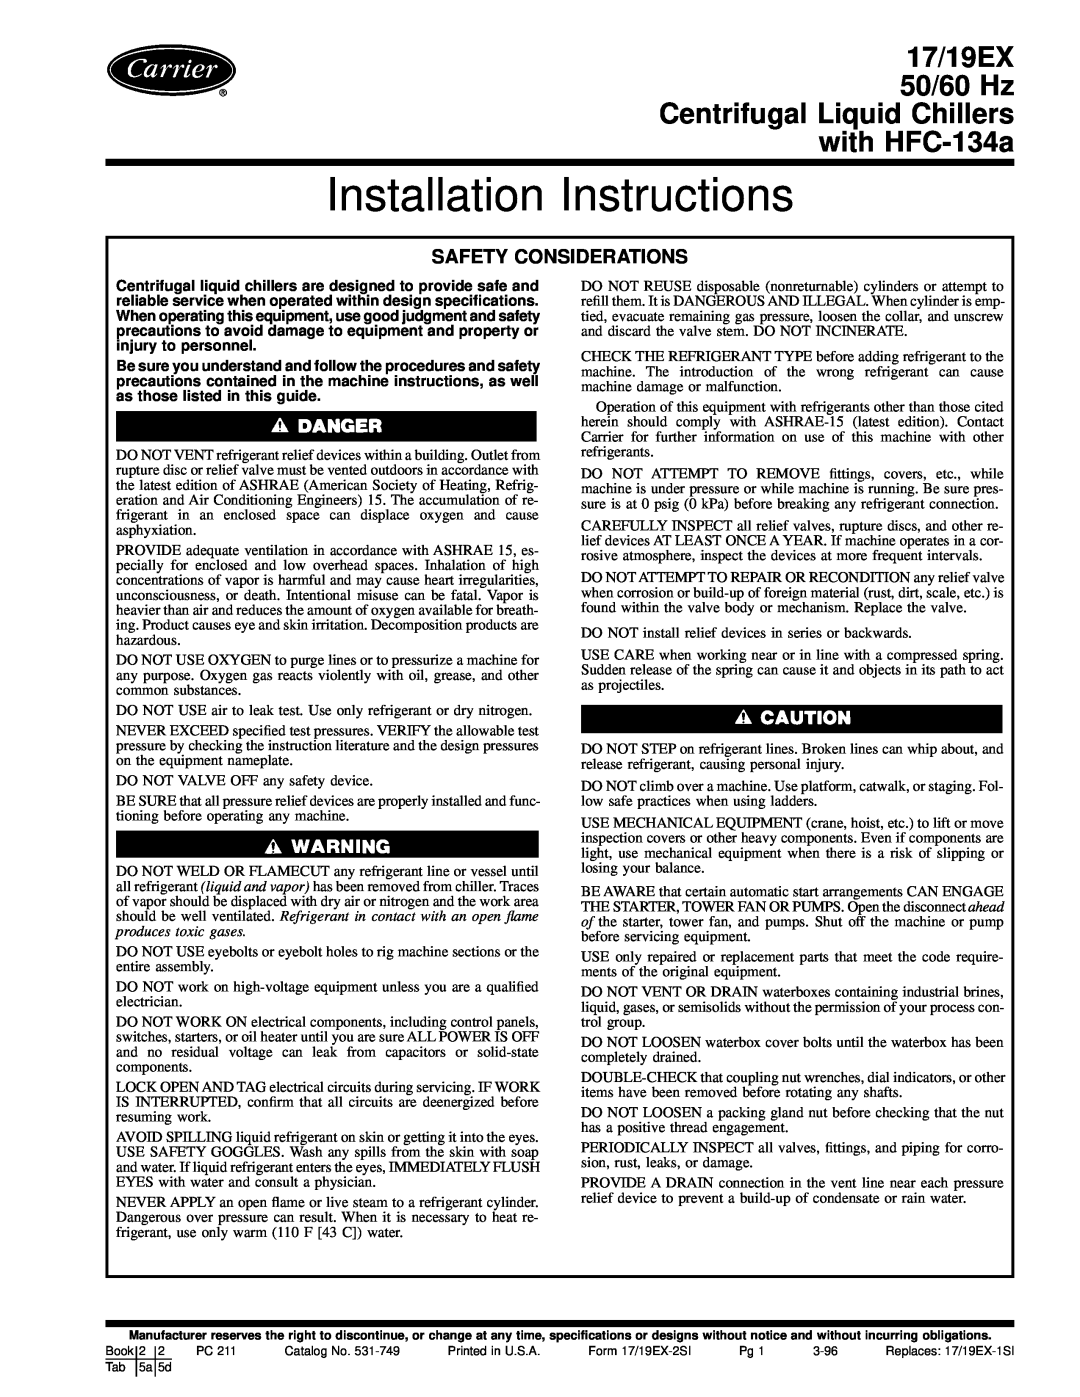 Carrier 17, 19EX installation instructions Safety Considerations, Installation Instructions 